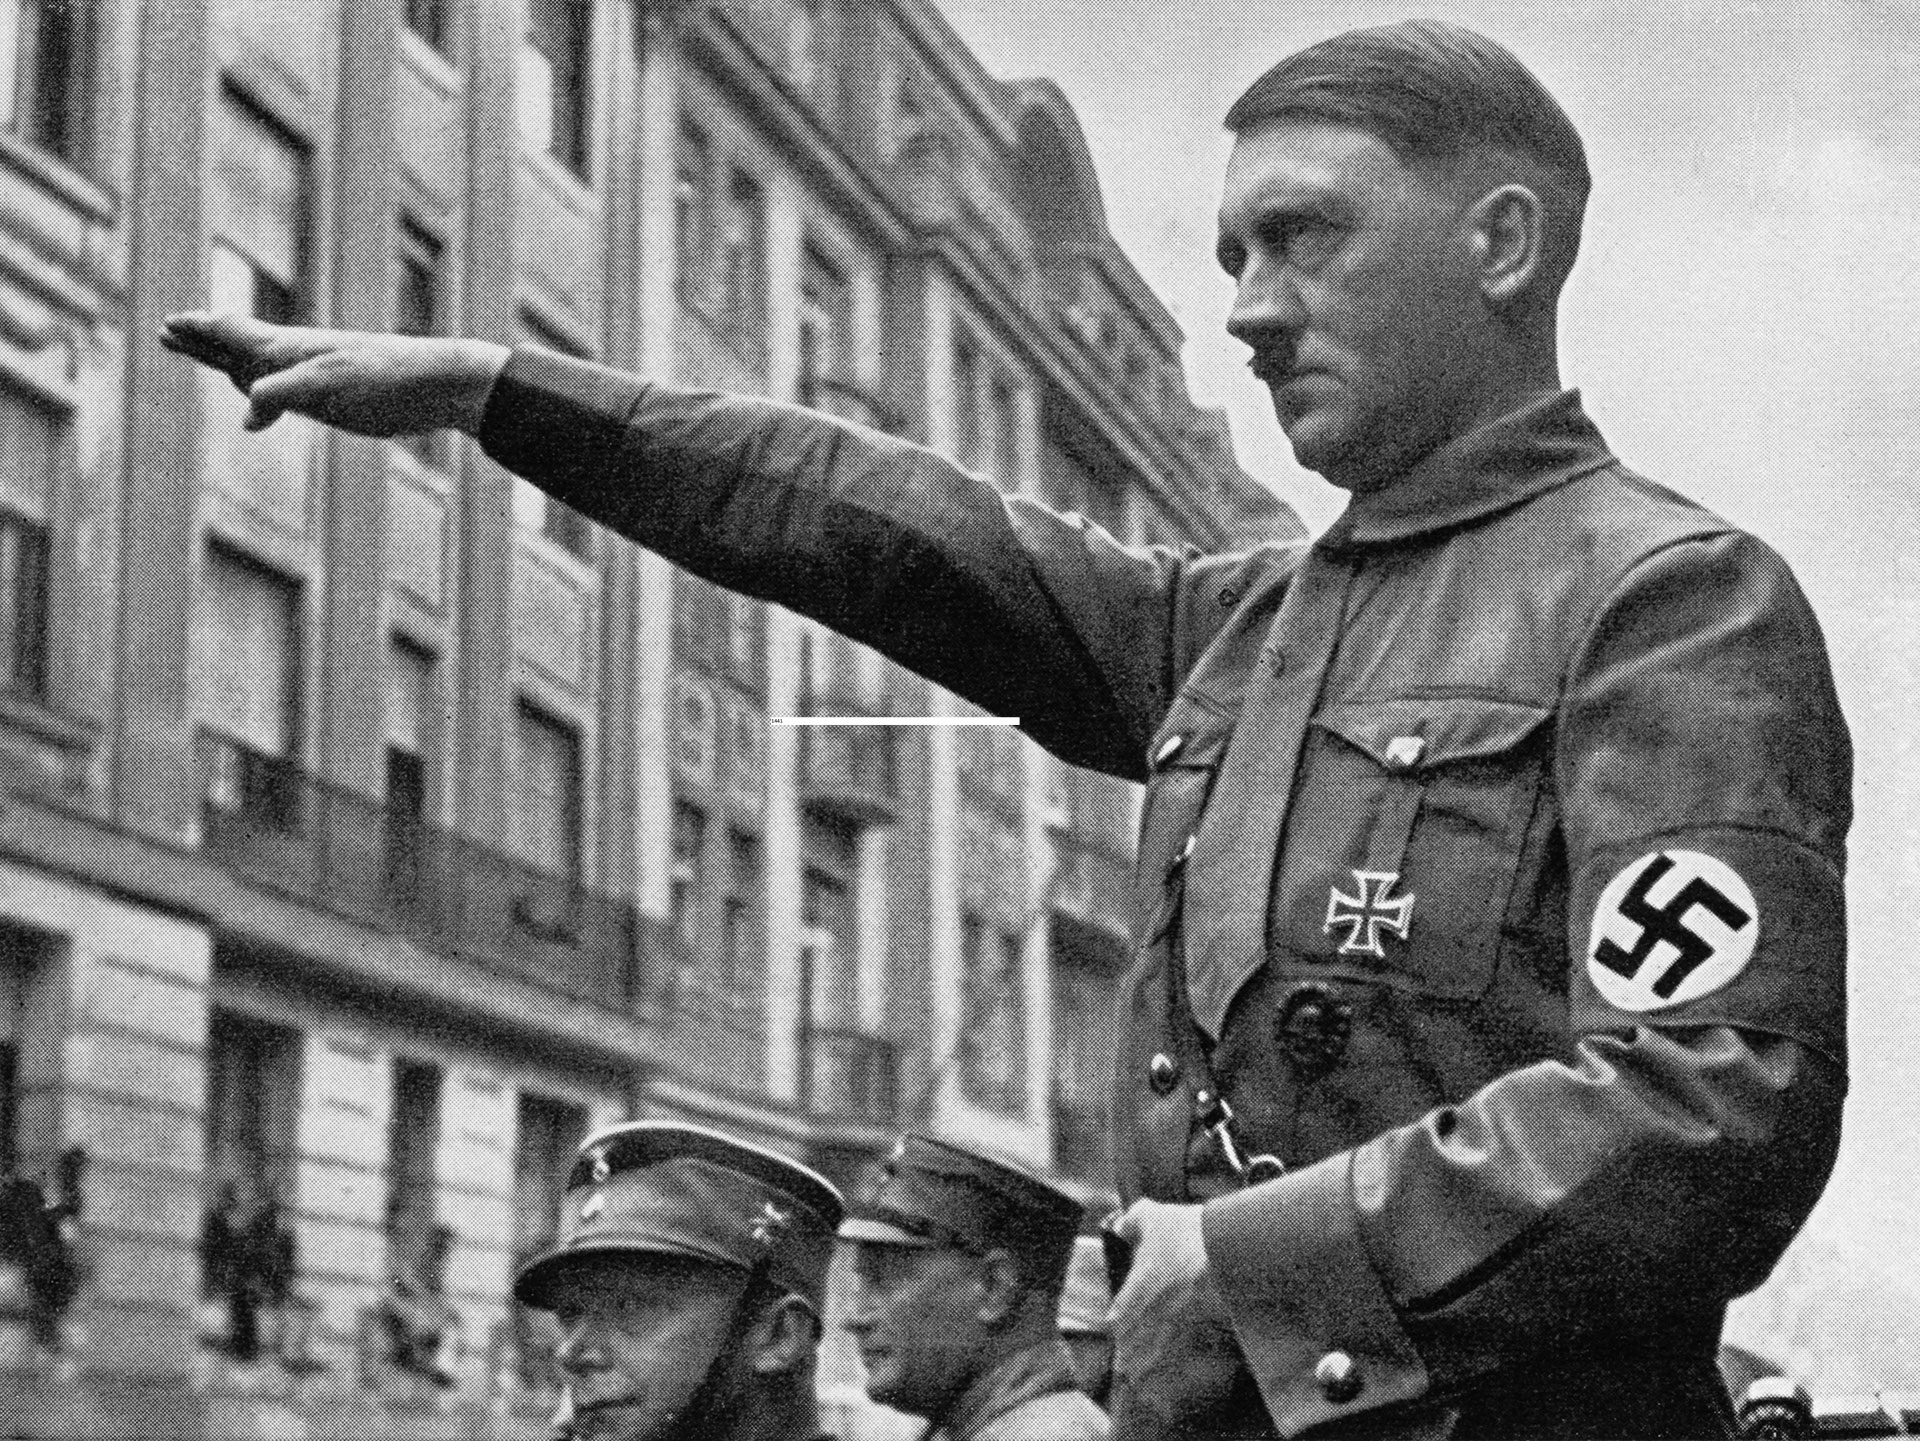 Former US CIA spy claims Adolf Hitler faked his death